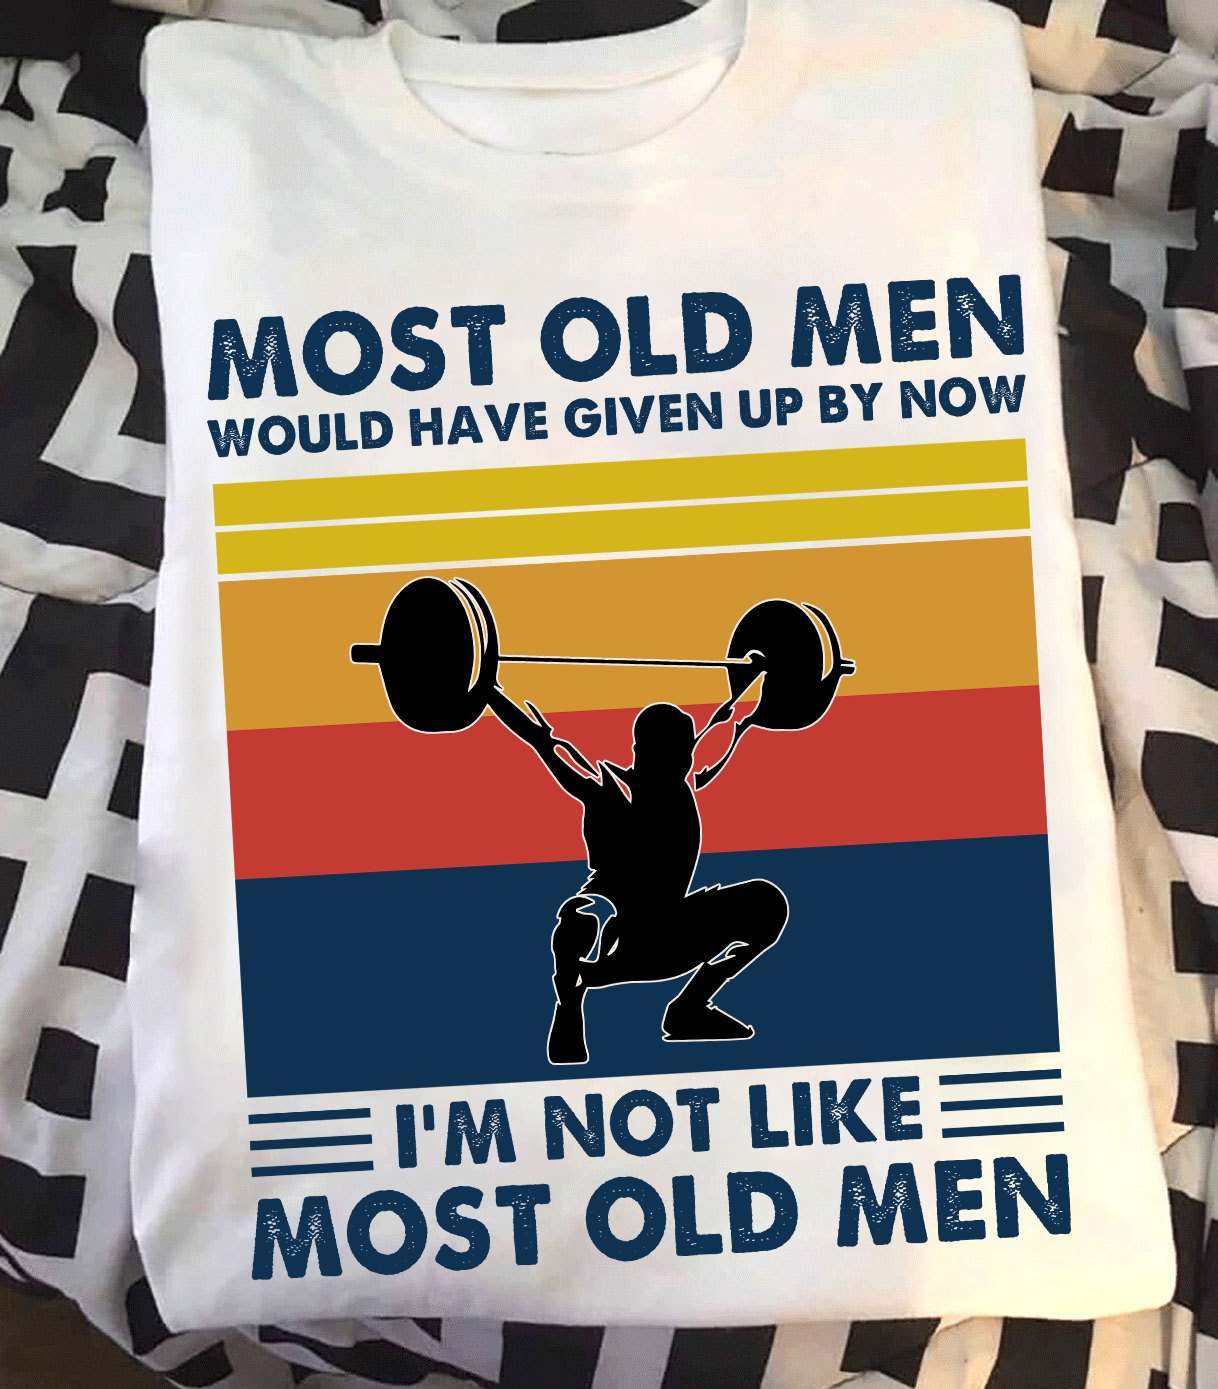 Weightlifting Man - Most old men would have given up by now i'm not like most old men